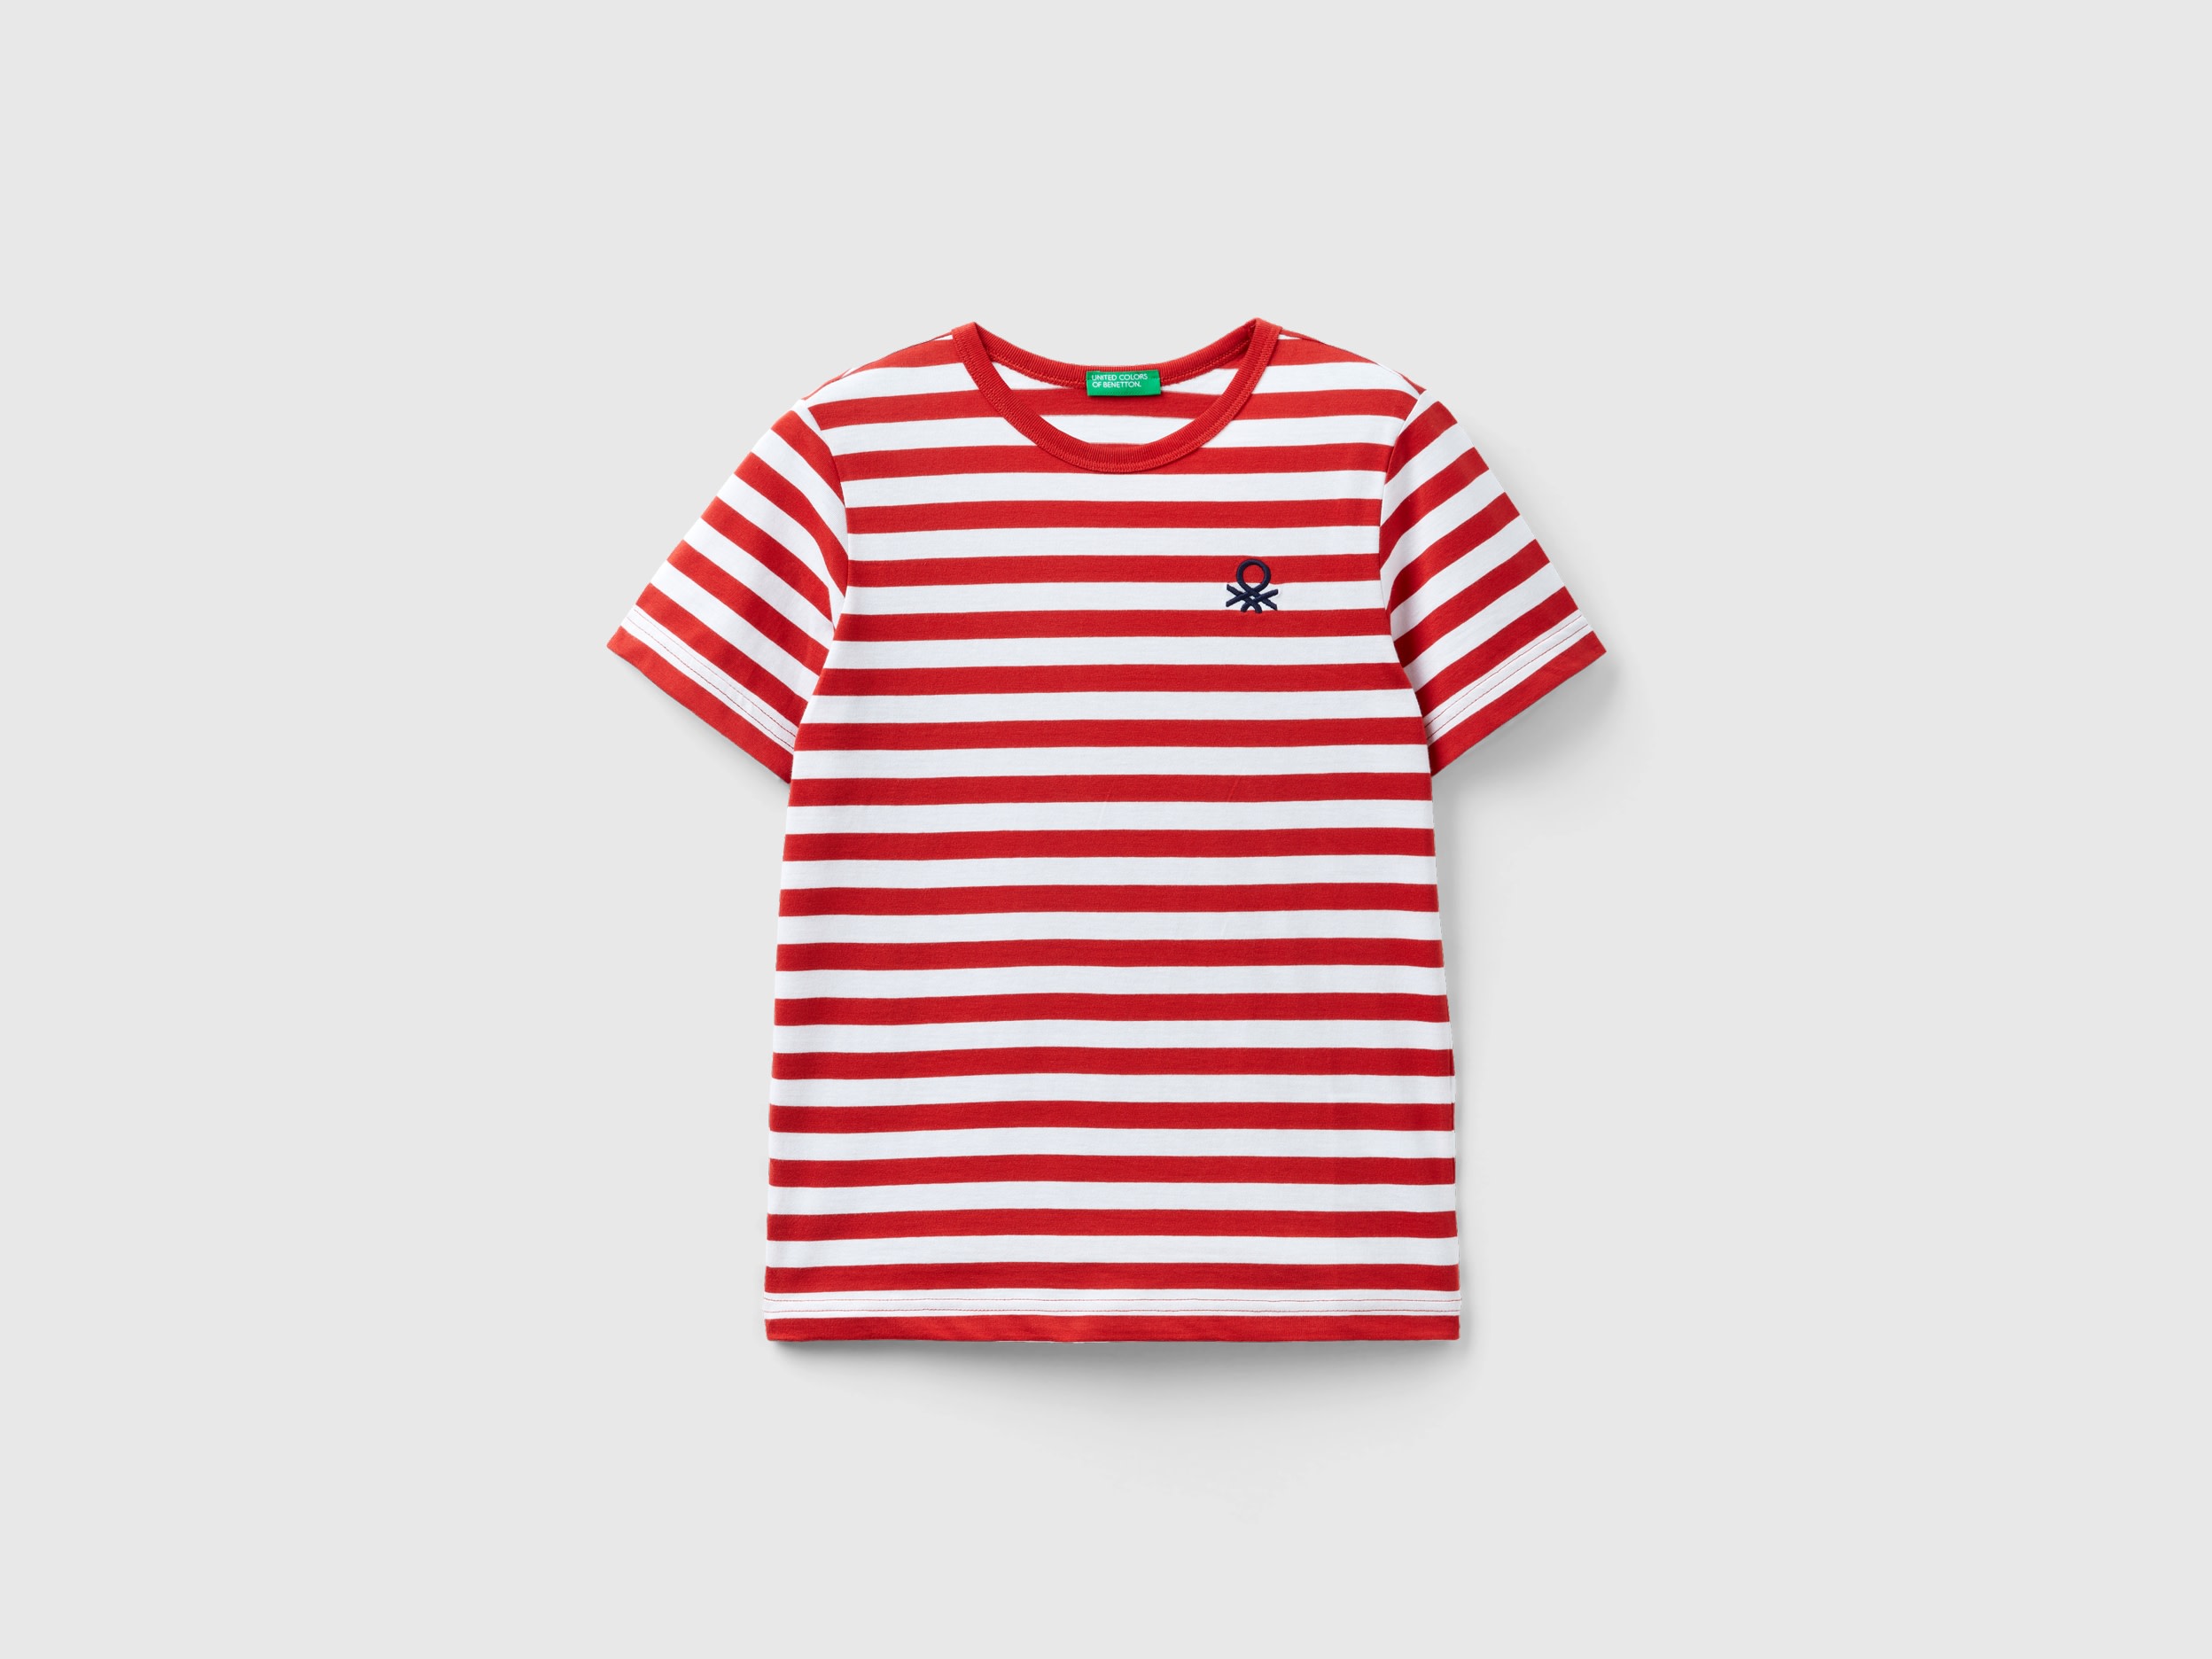 Benetton, Striped 100% Cotton T-shirt, size S, Red, Kids